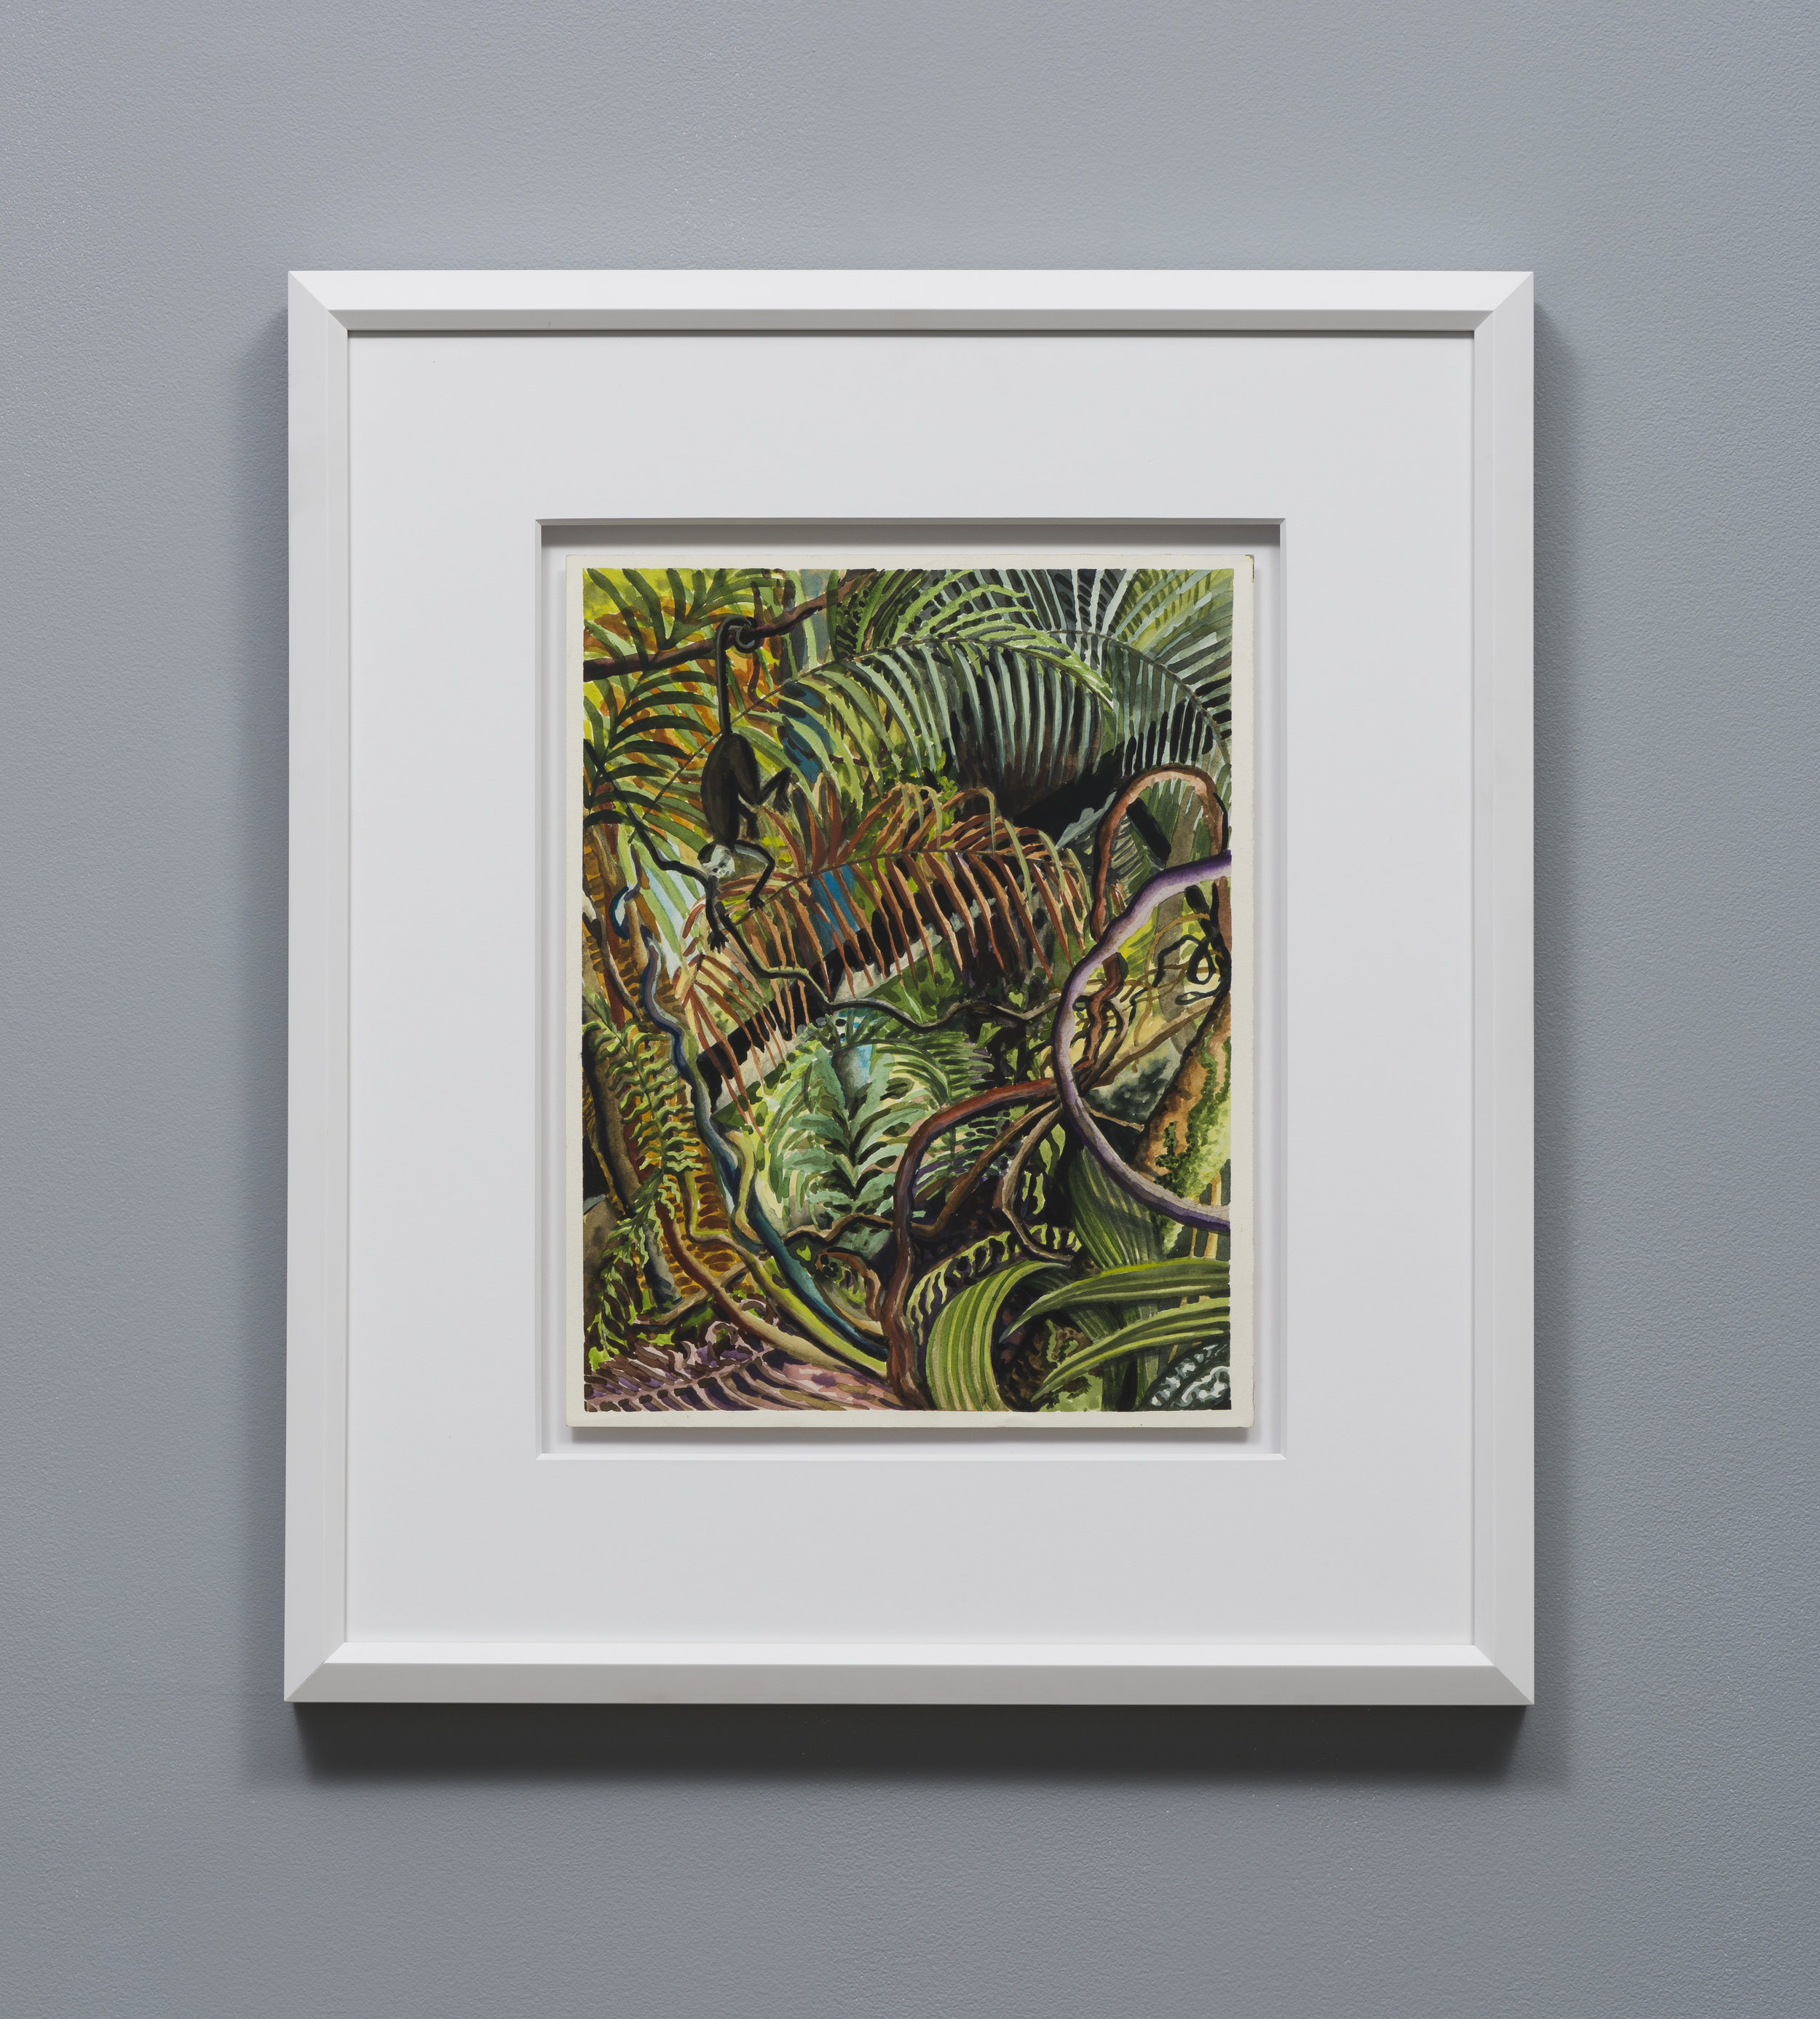   Suzan Pitt  Dense Jungle     1989 Watercolor on paper 14.75 x 11.5 inches, 24.5 x 21 inches framed 